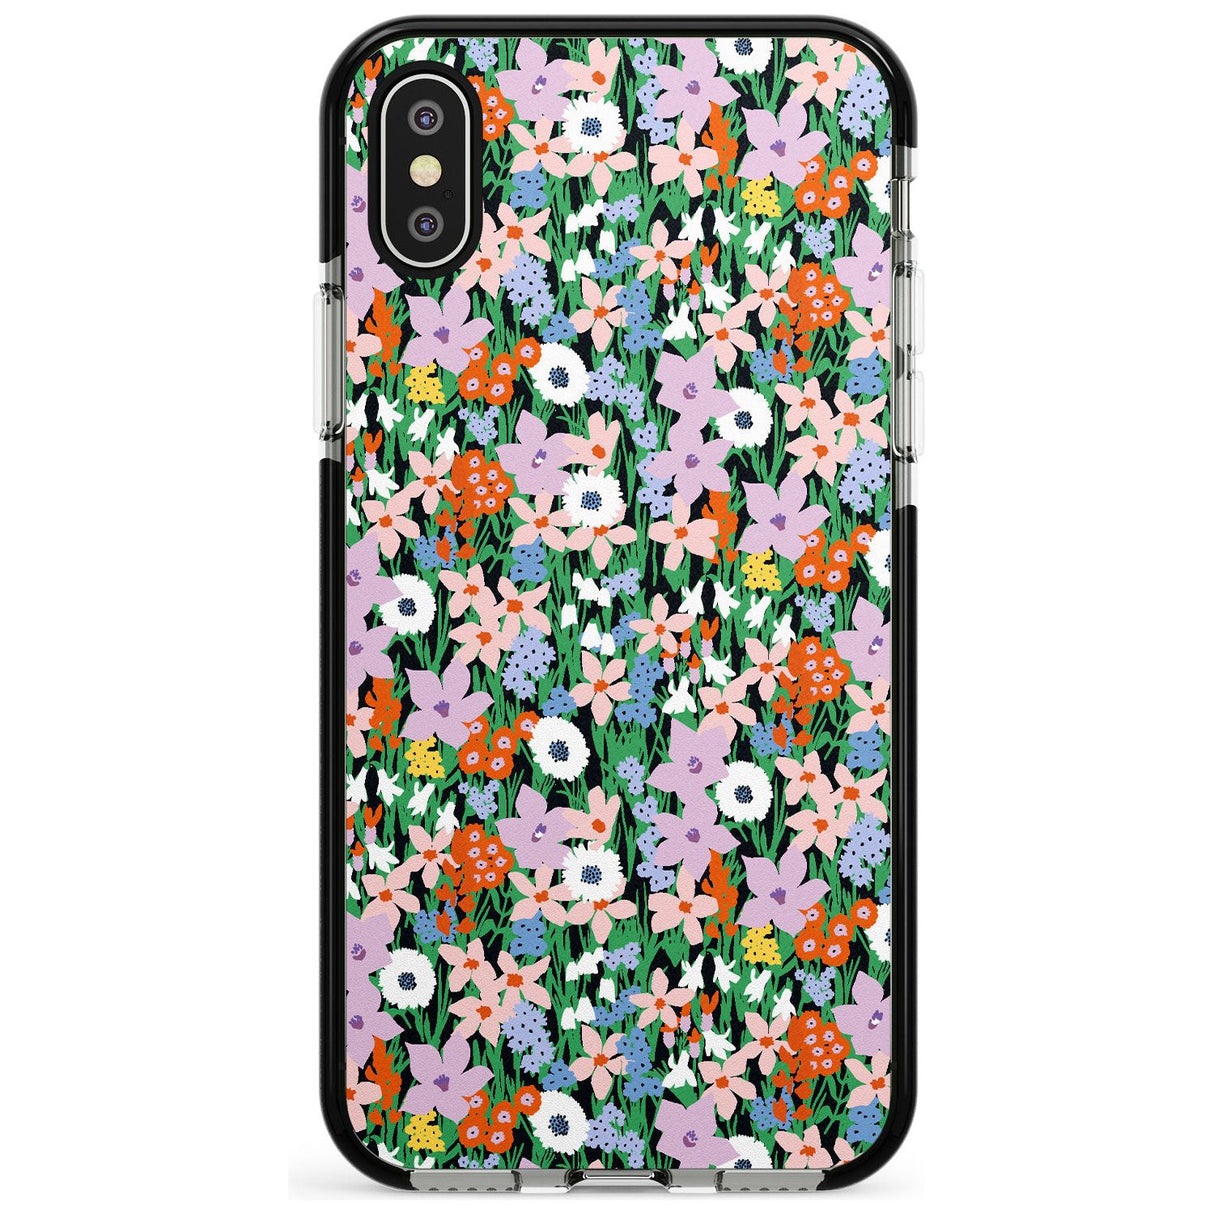 Jazzy Floral Mix: Solid Pink Fade Impact Phone Case for iPhone X XS Max XR